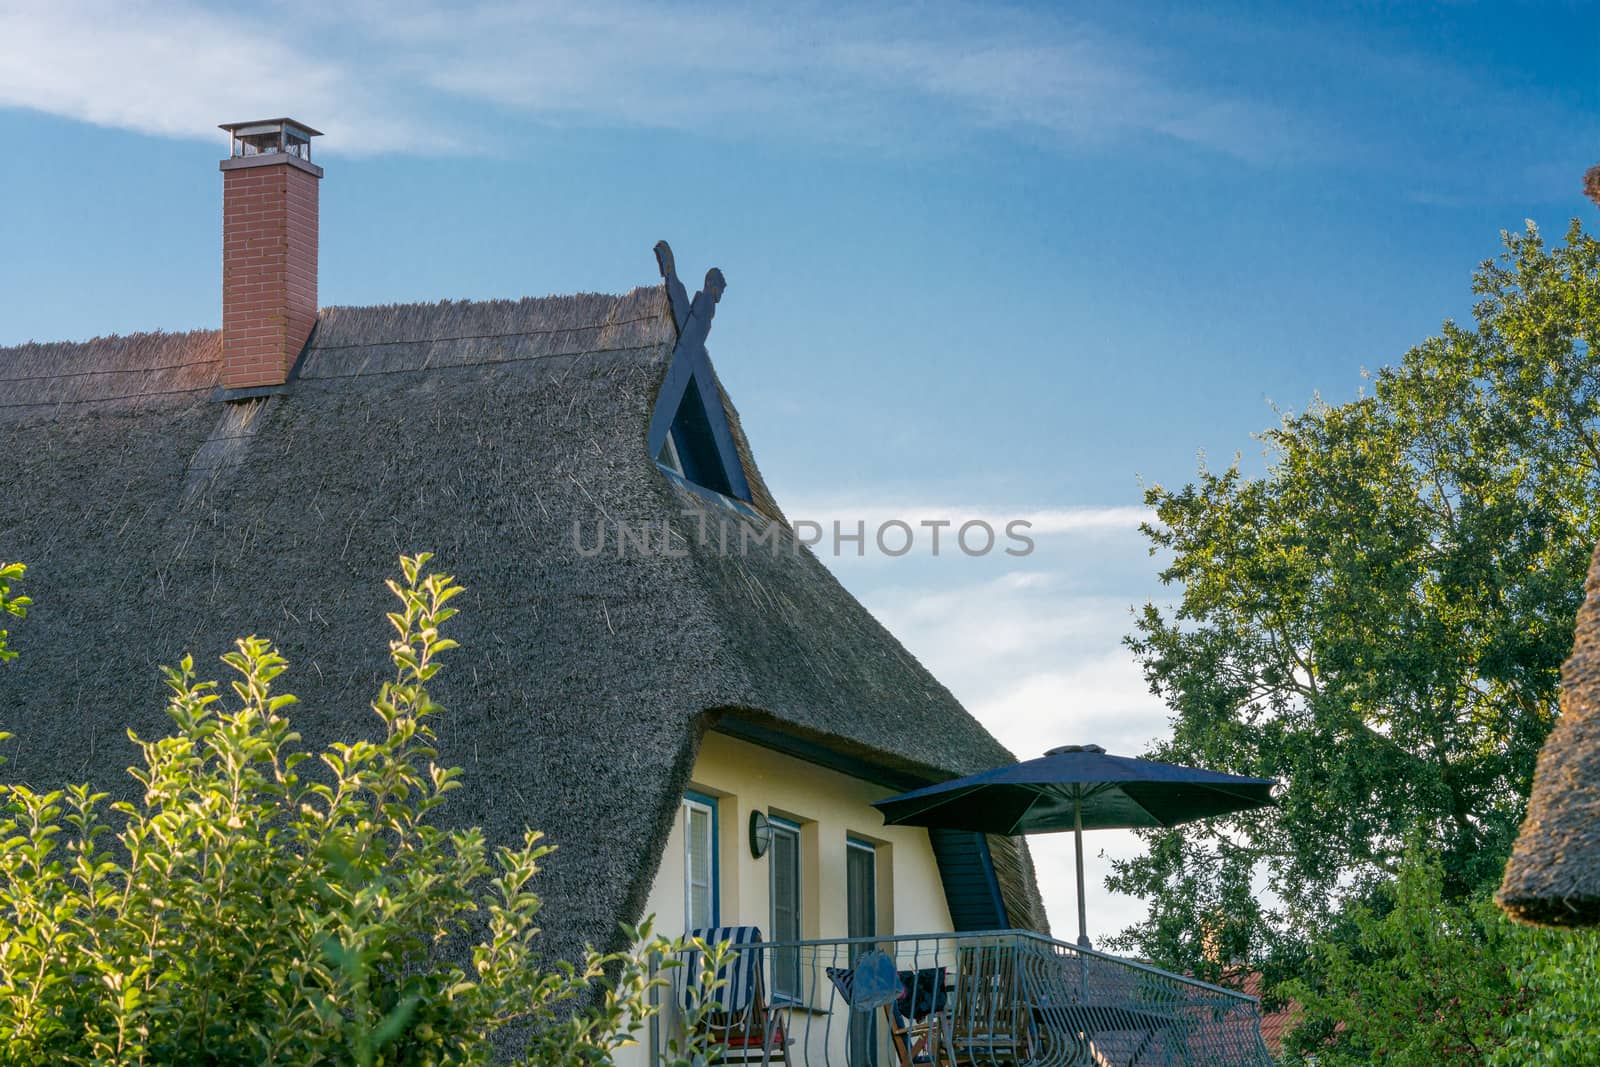 Detail of a house on the Fischland-Darß by JFsPic